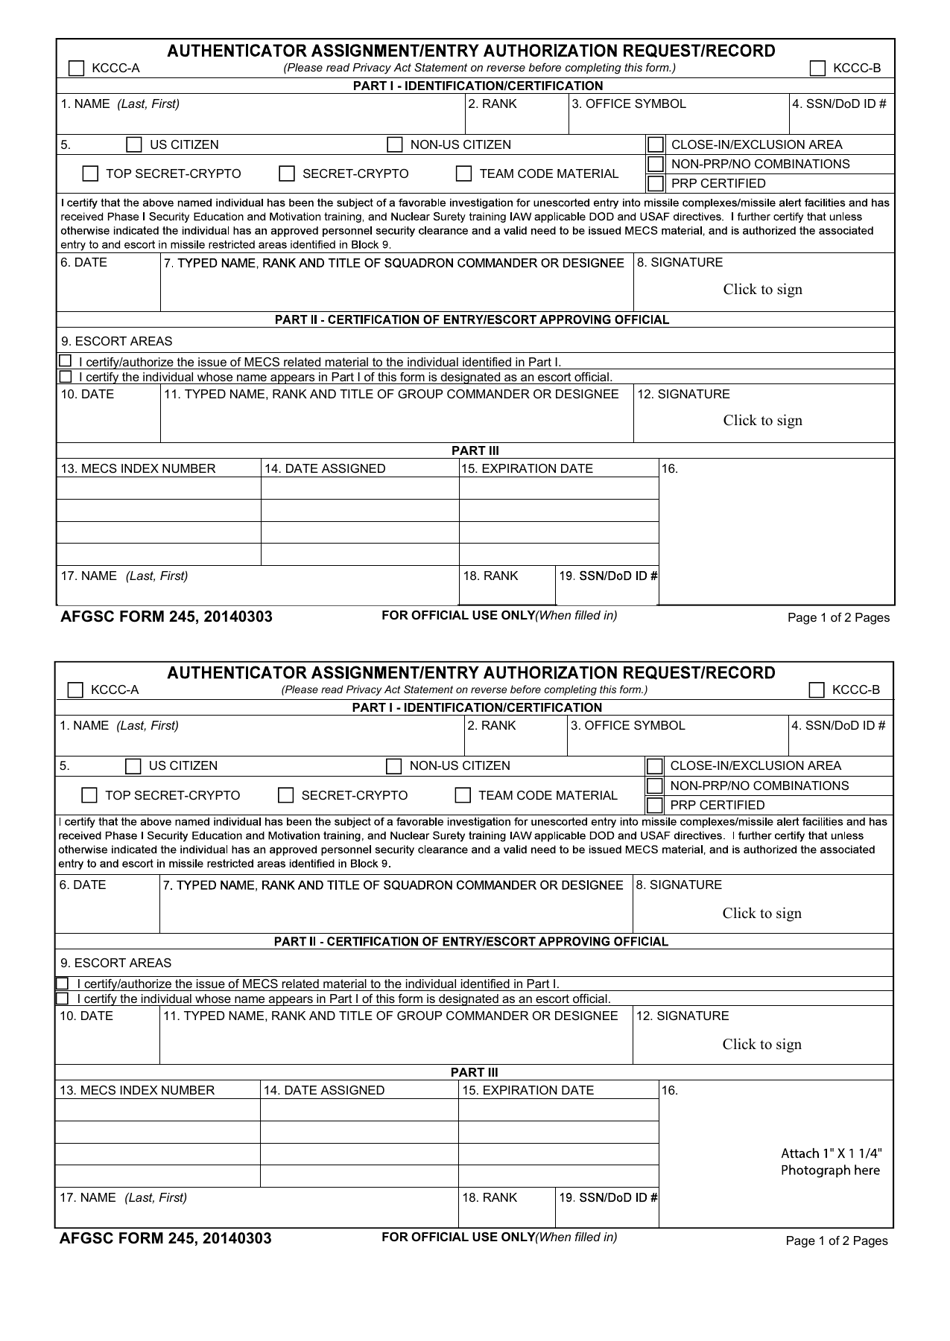 AFGSC Form 245 Authenticator Assignment / Entry Authorization Request / Record, Page 1